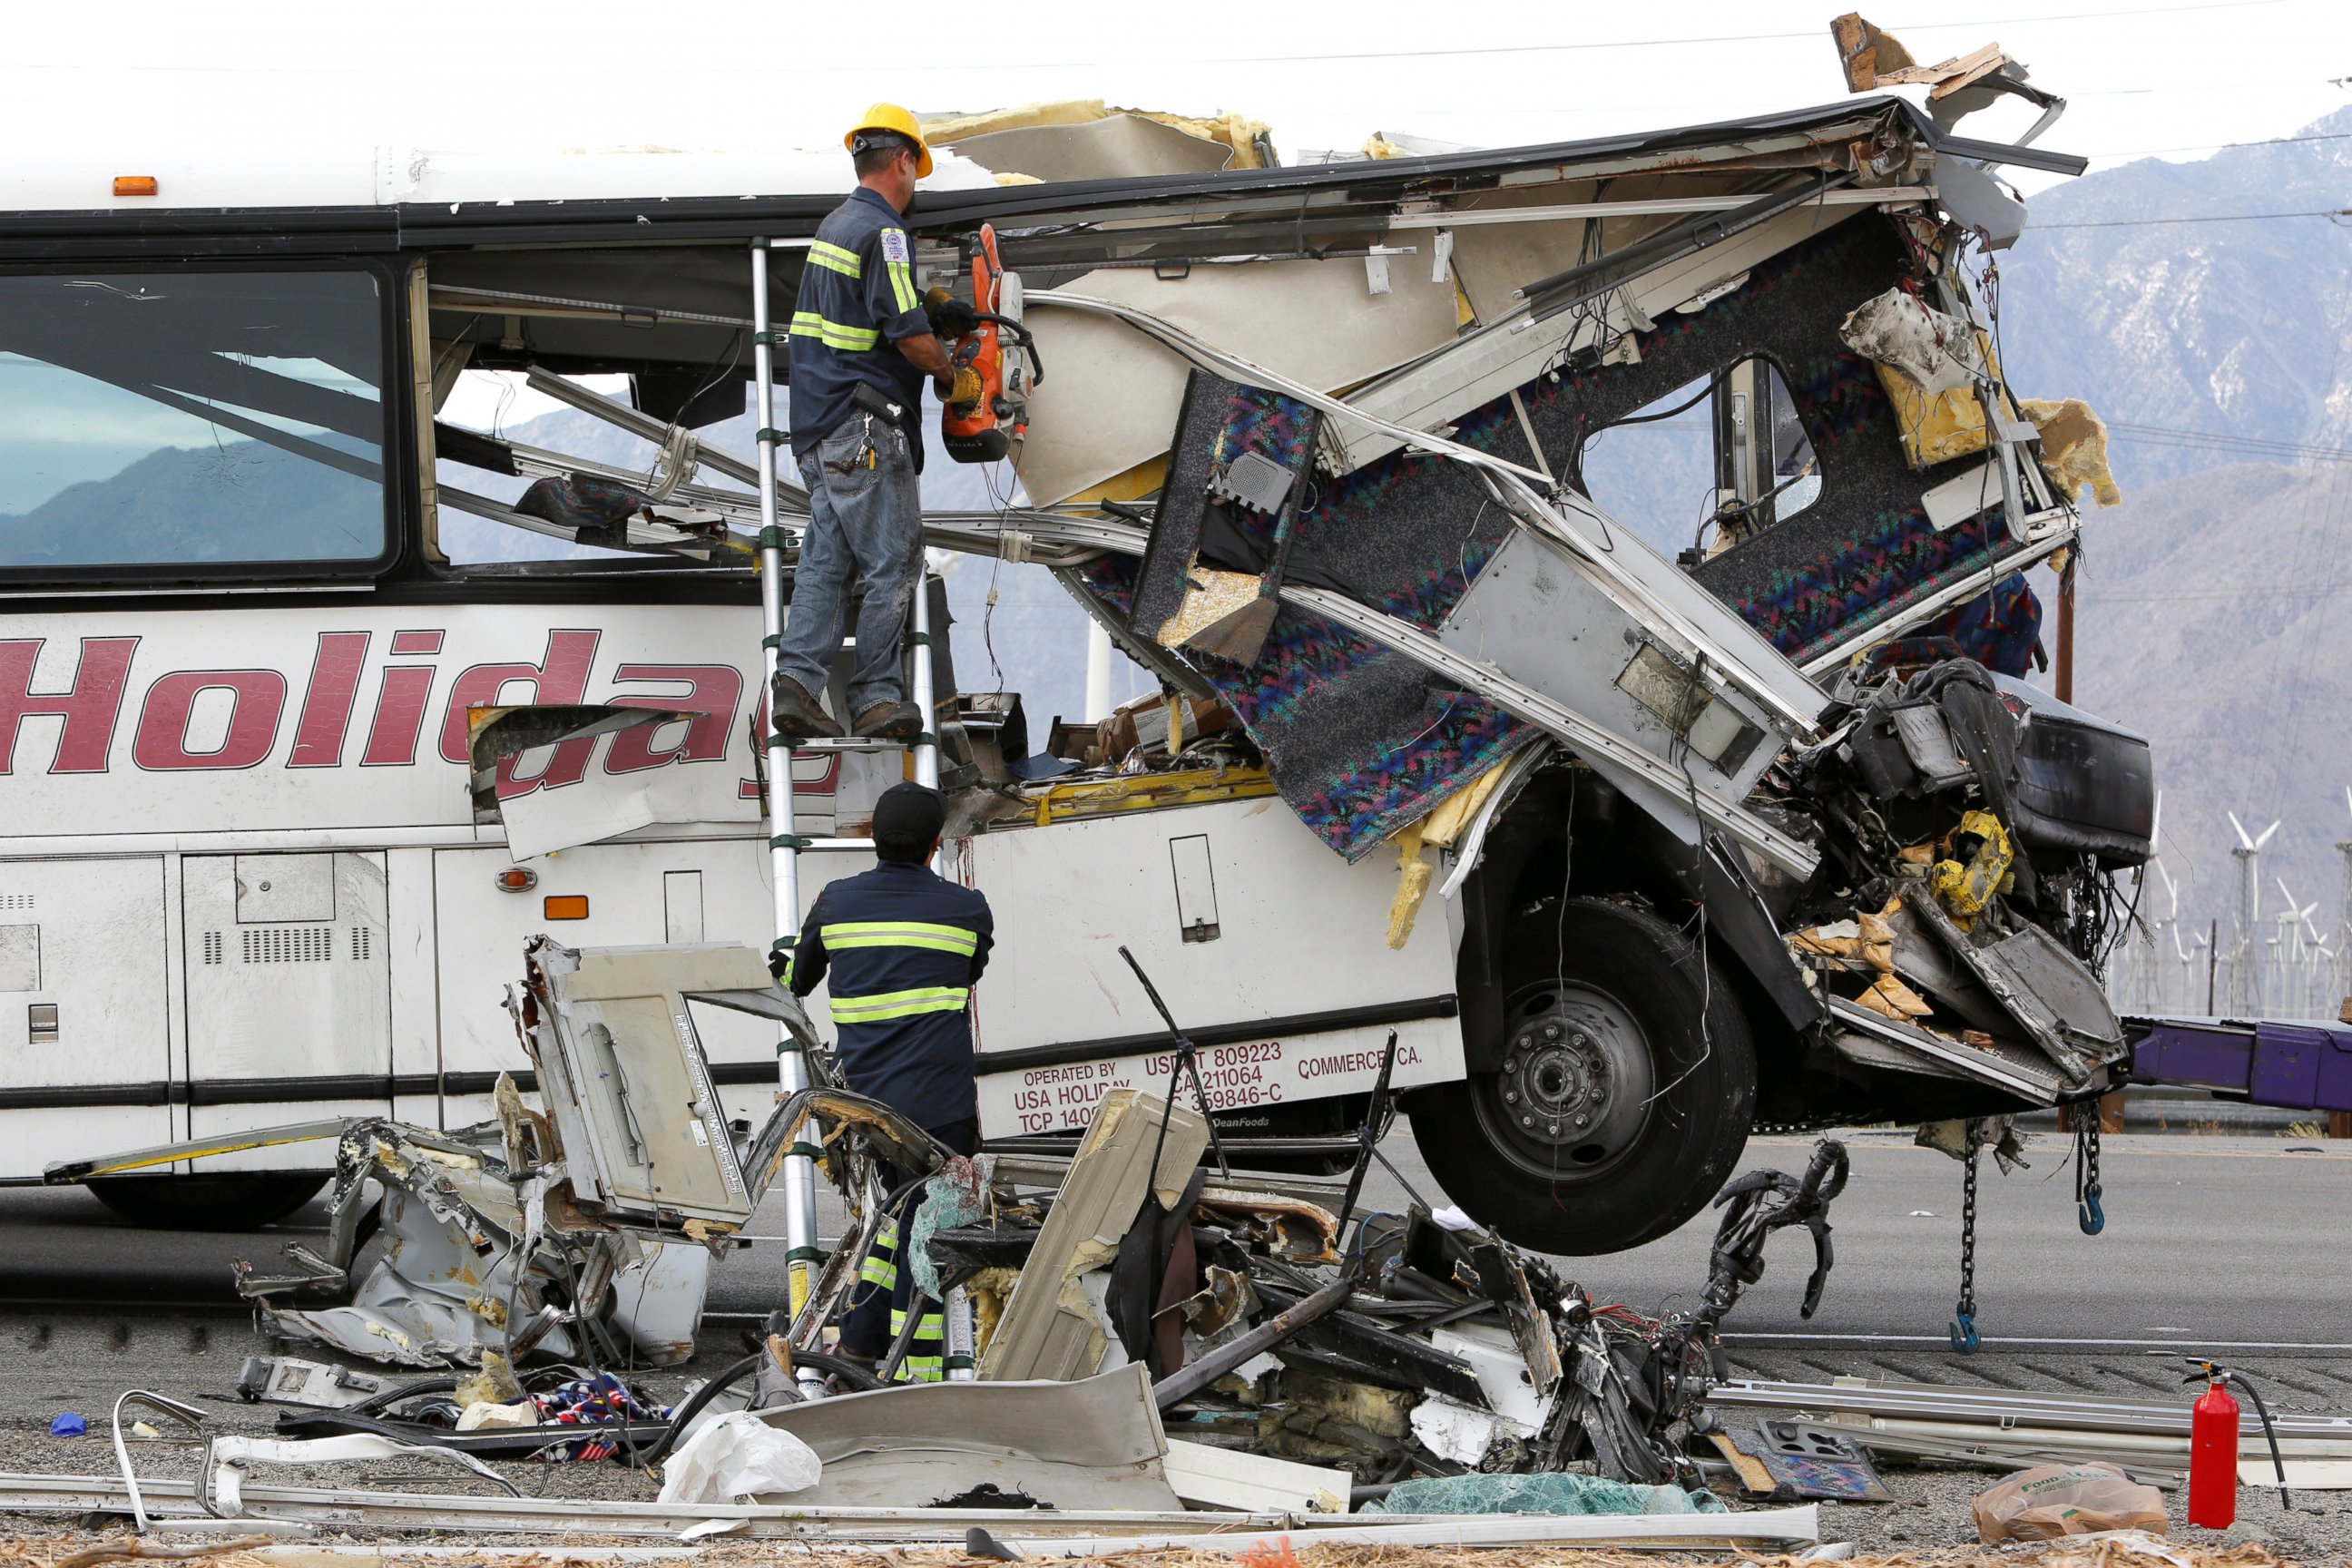 PHOTO: Workers cut away debris from the front of a bus involved in a mass casualty crash on the westbound Interstate 10 freeway near Palm Springs, California, Oct. 23, 2016.  